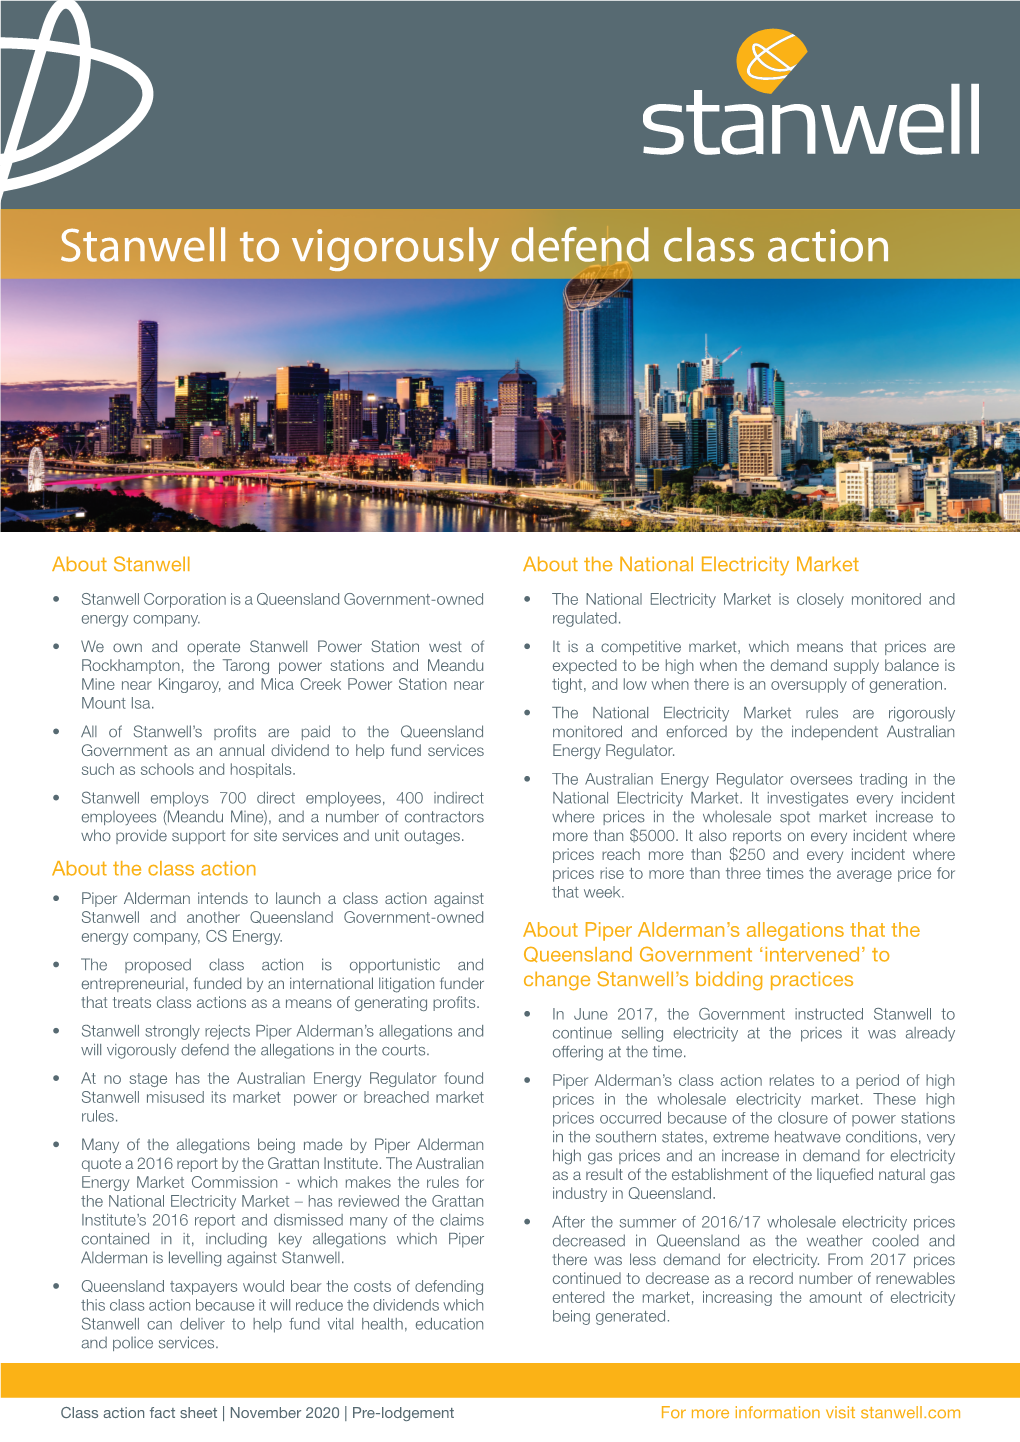 Stanwell to Vigorously Defend Class Action